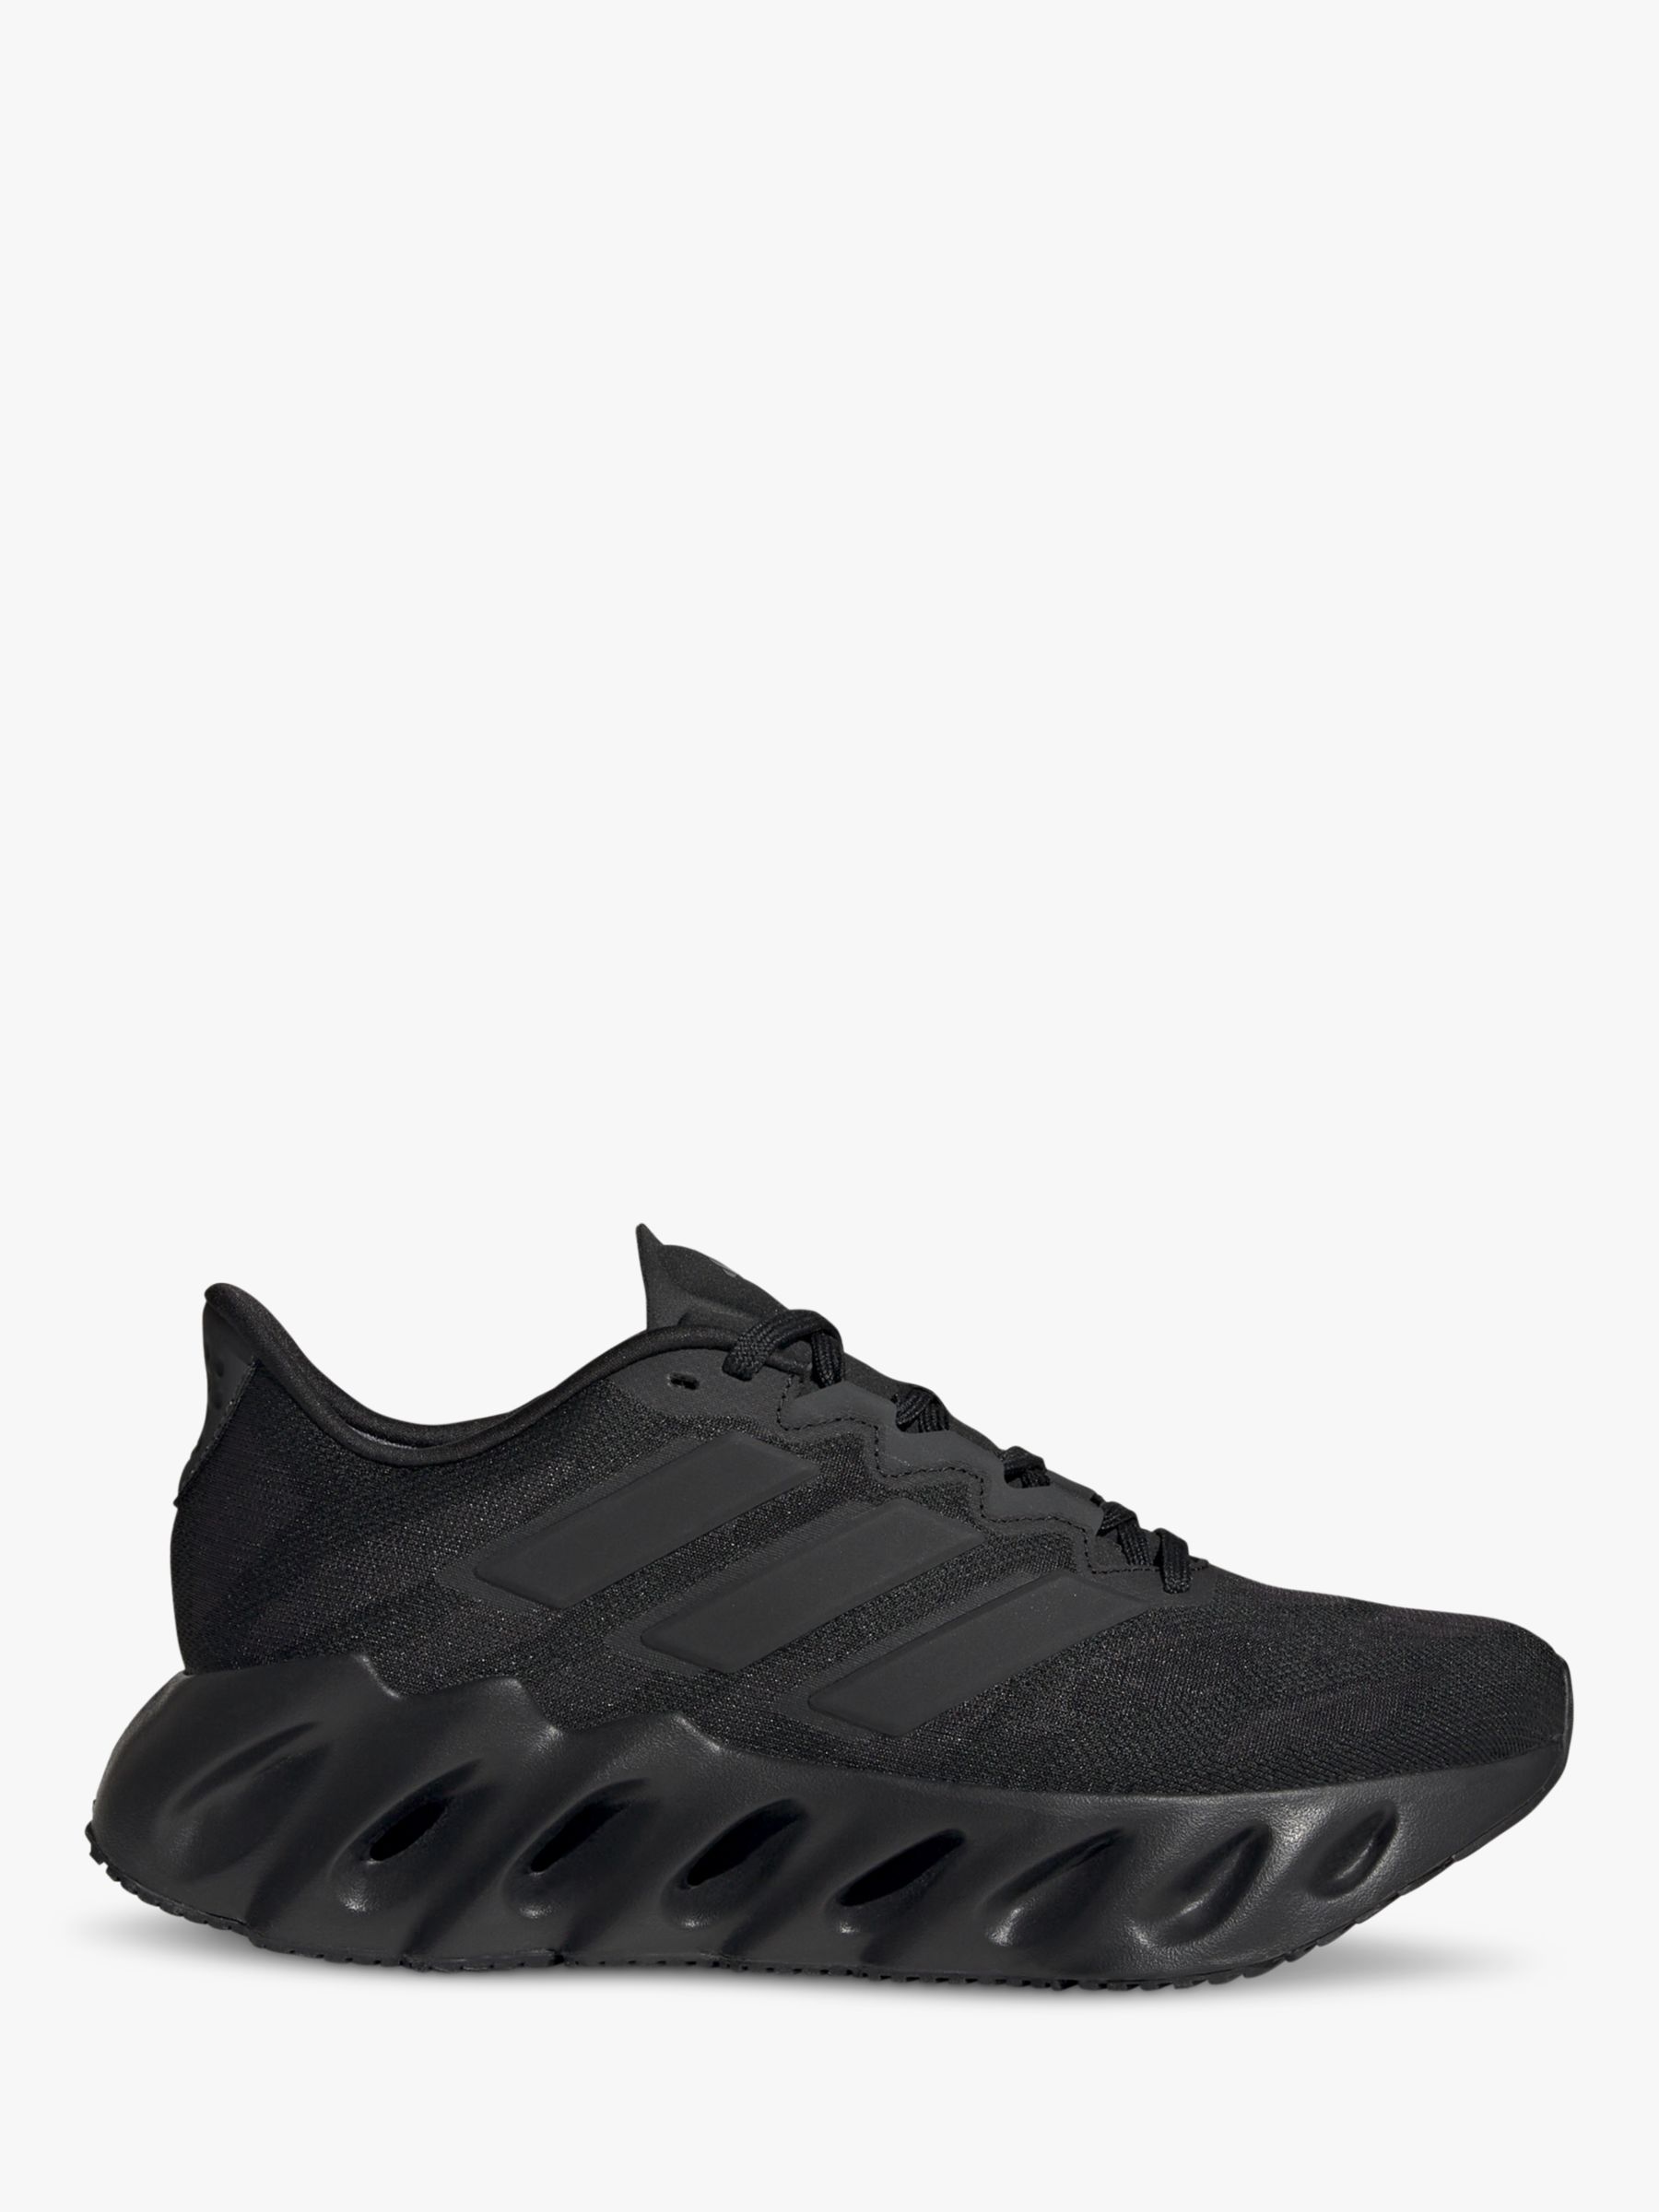 adidas Switch FWD Women's Sports Trainers, Black/Carbon, 6.5